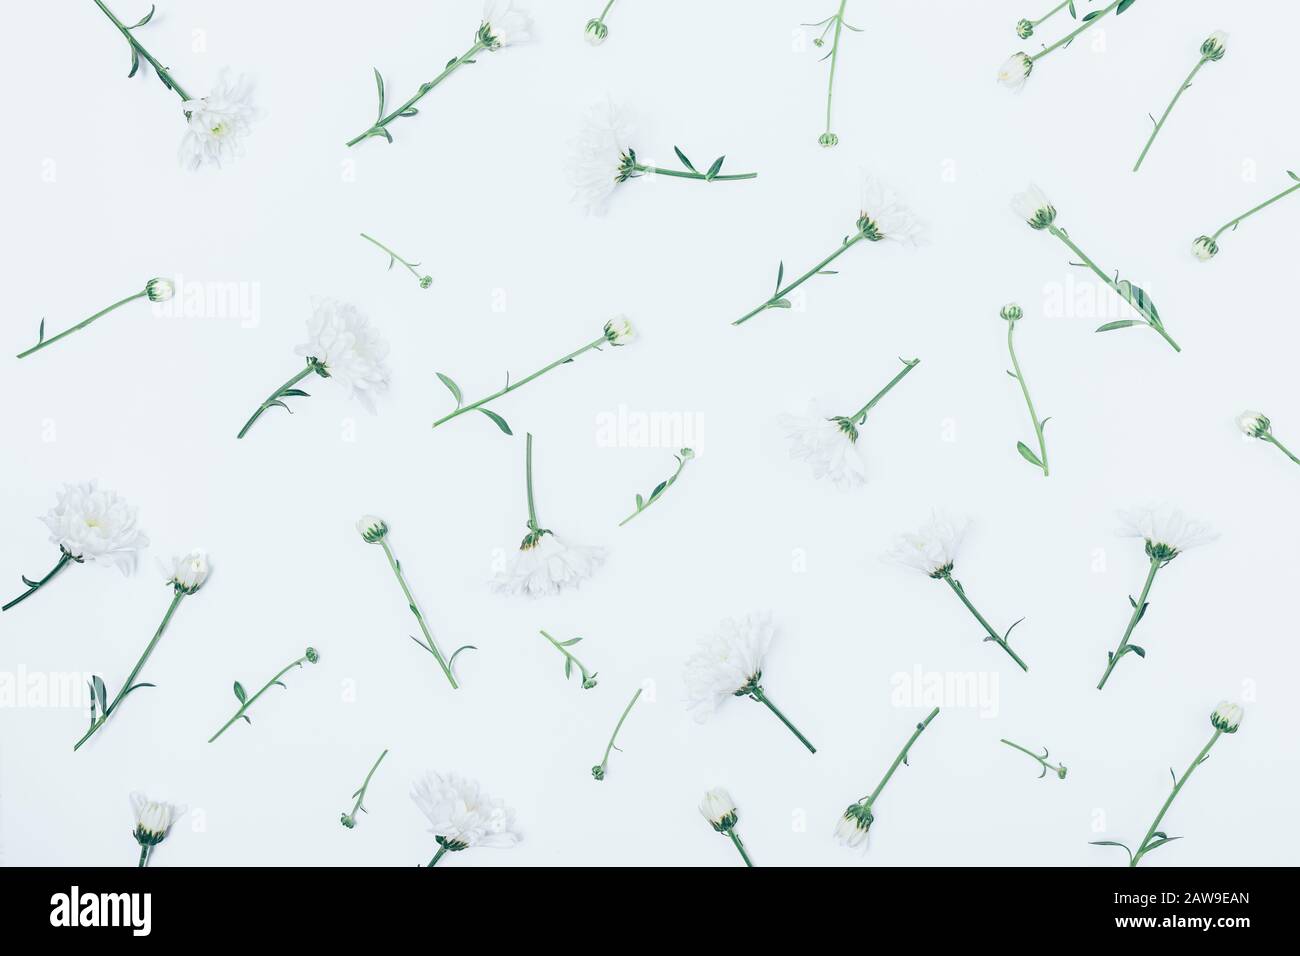 Pattern of small fresh spring flowers with green stems on white background, flat lay. Stock Photo